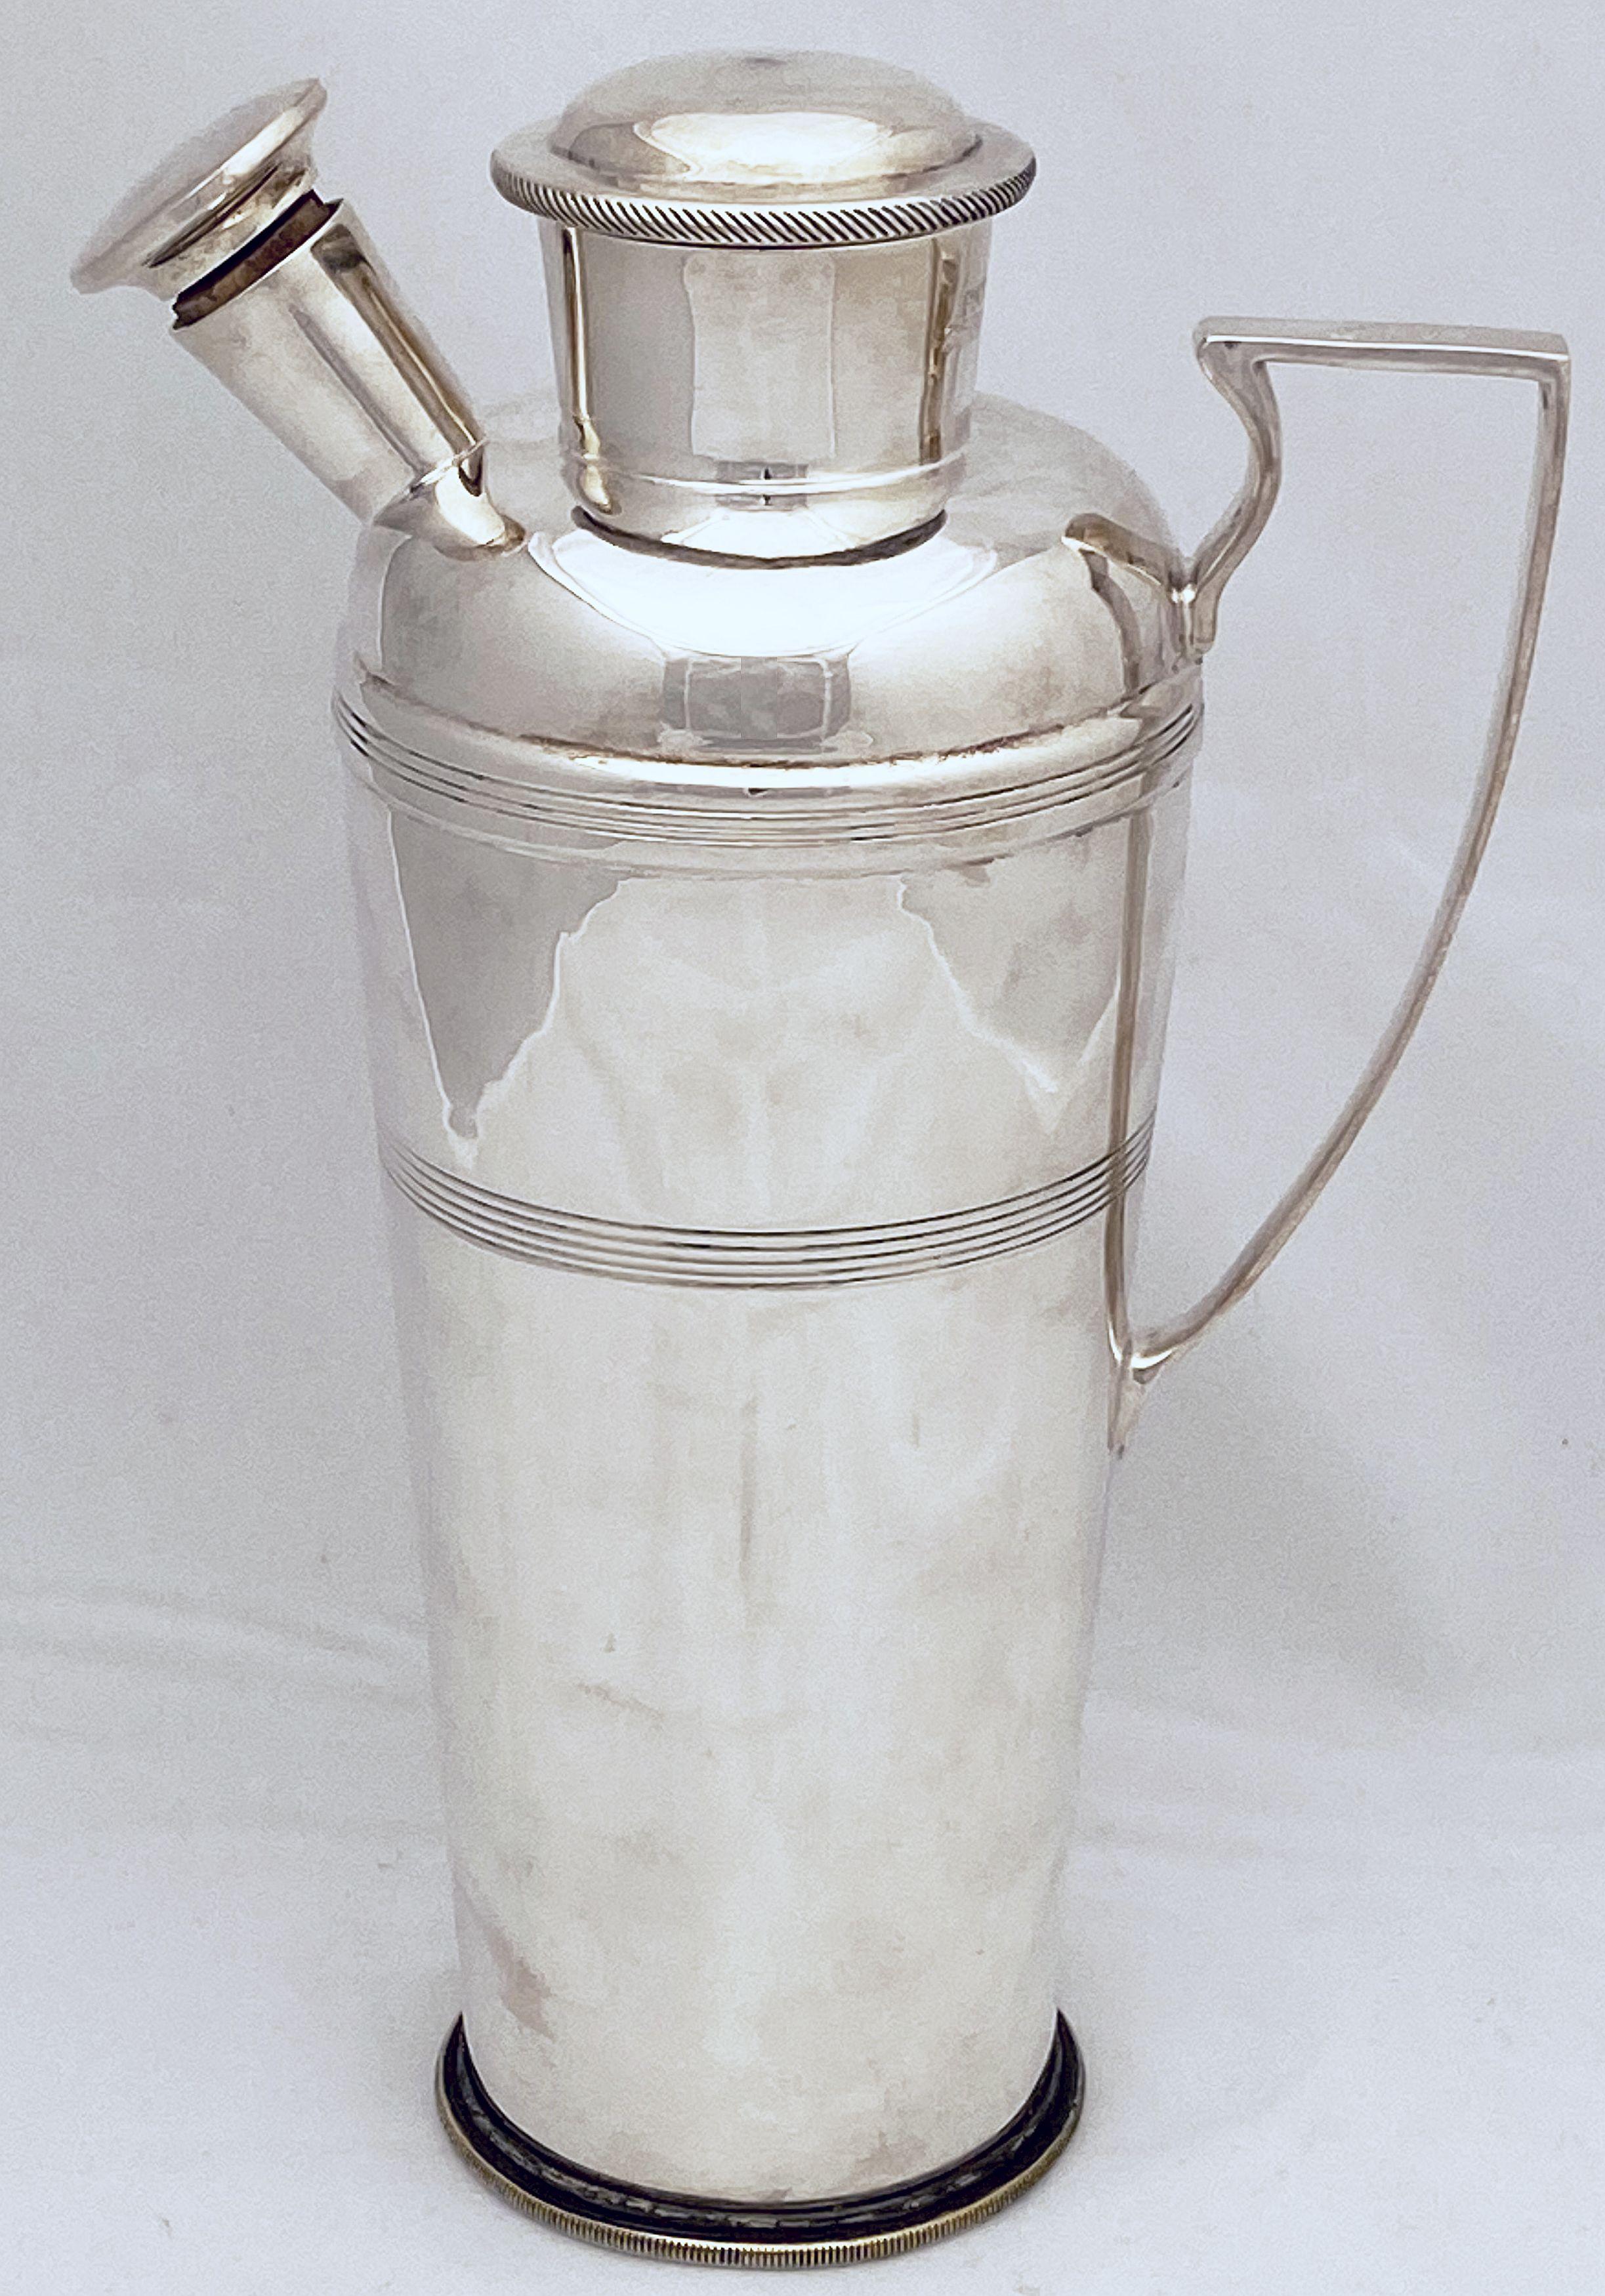 20th Century English Cocktail or Martini Shaker from the Art Deco Period